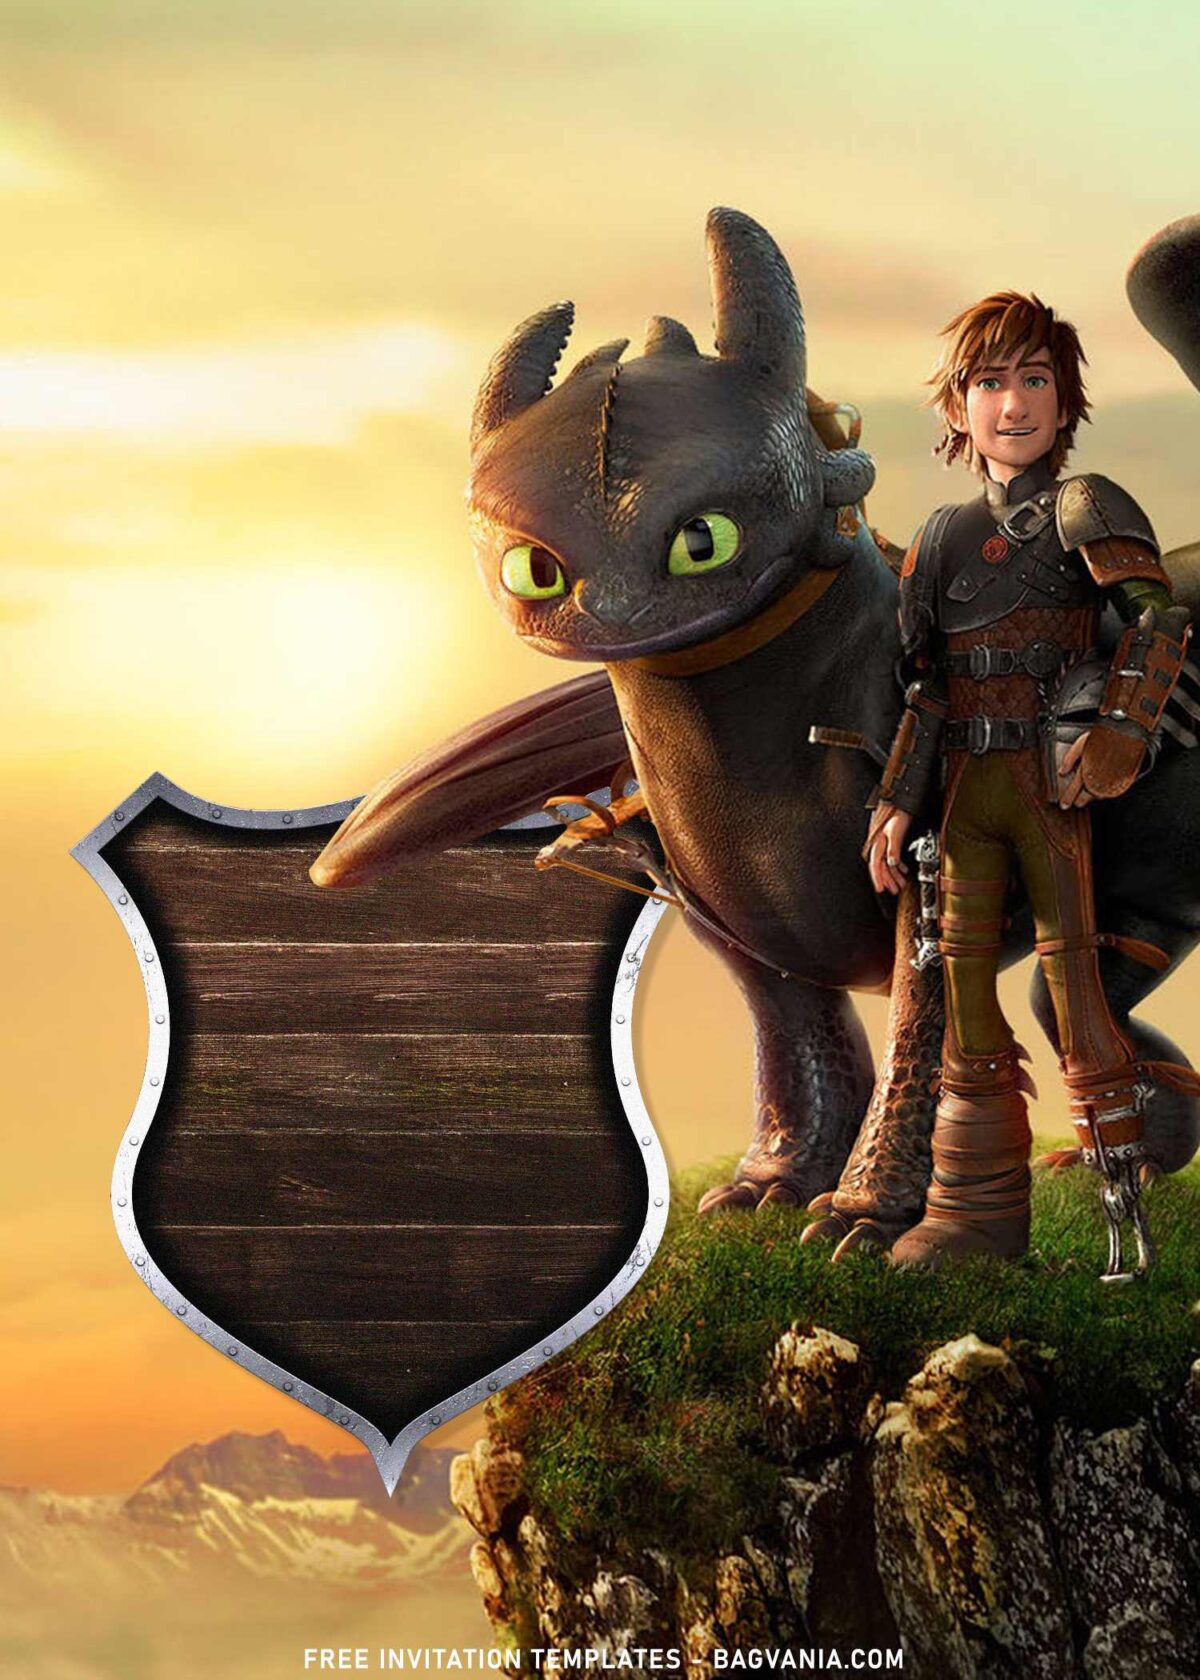 8+ How To Train Your Dragon Birthday Invitation Templates with Toothless and Hiccup on hill